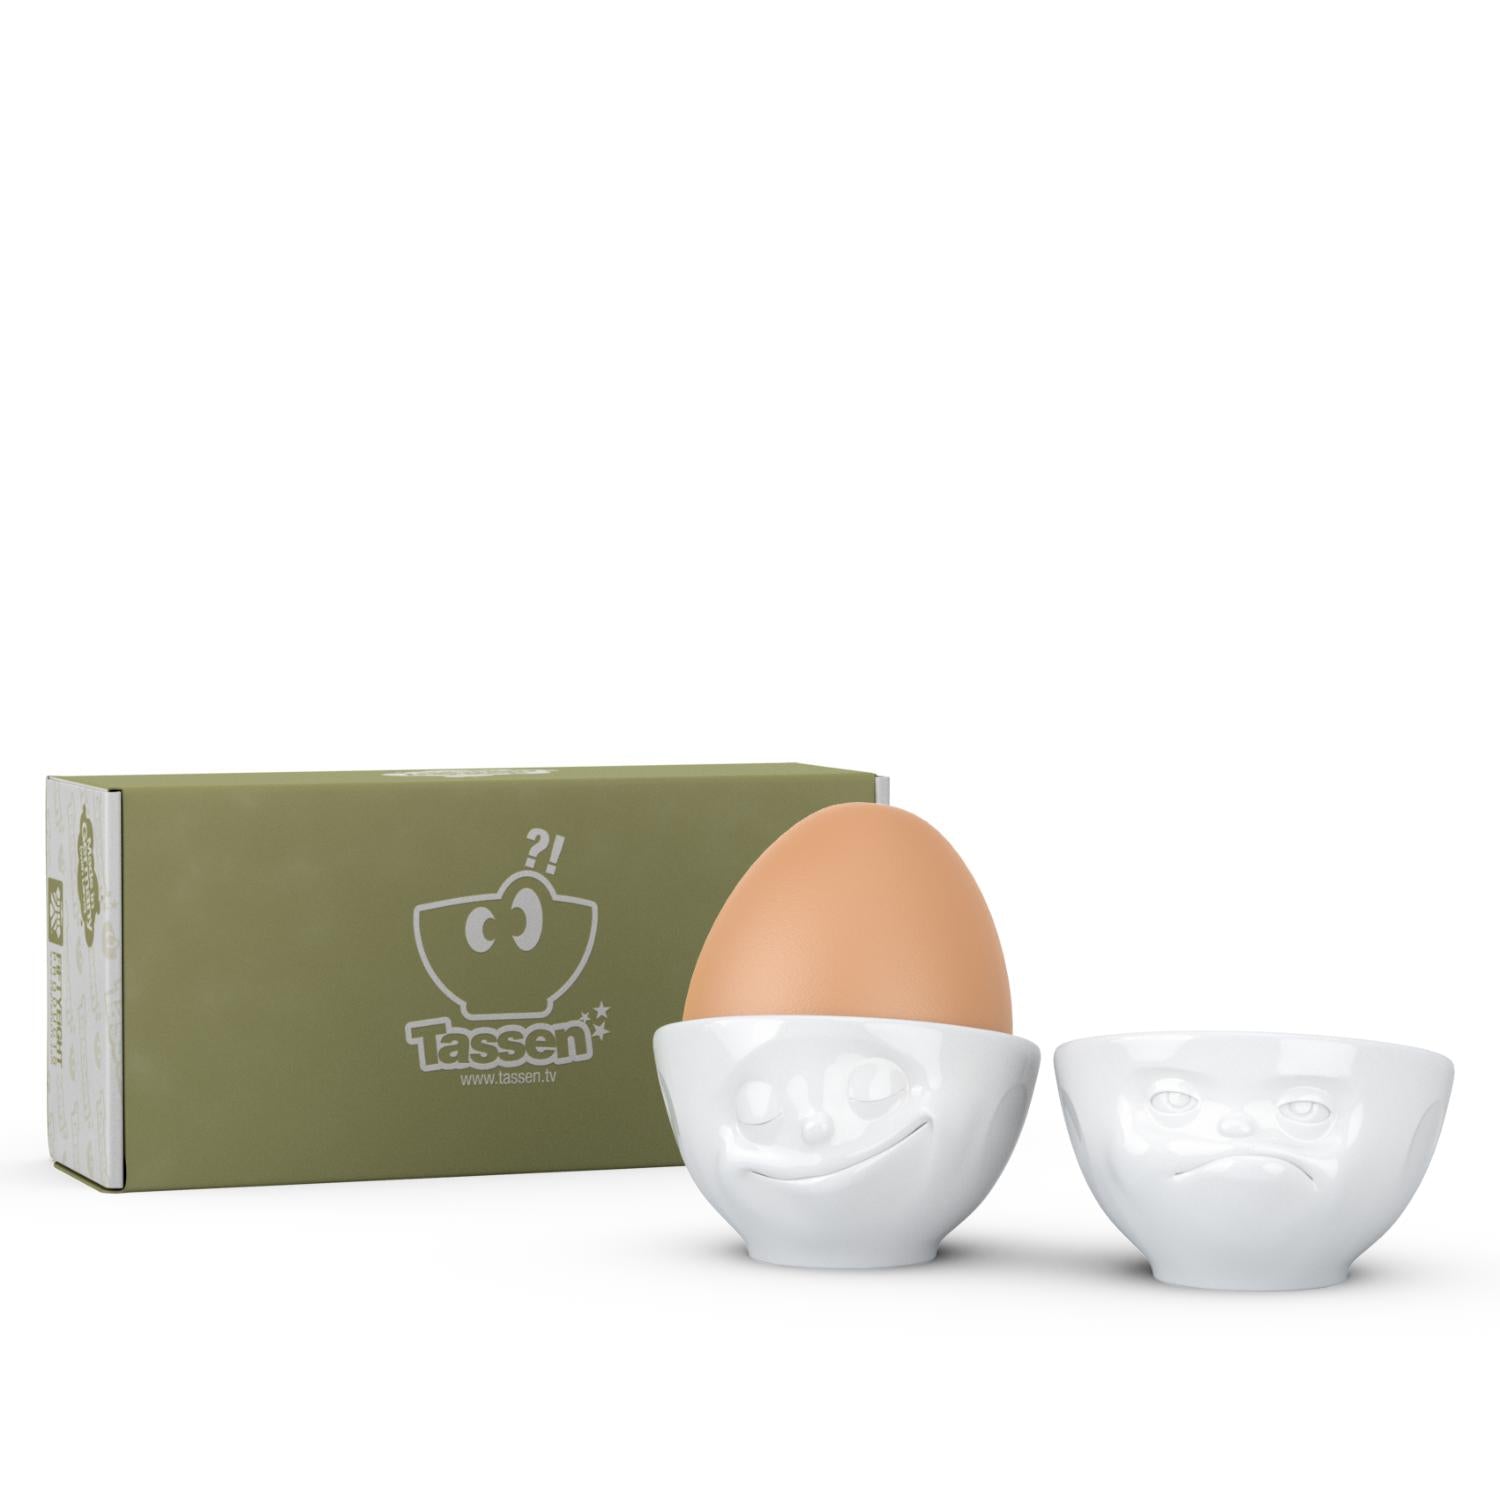 Ceramic Egg Cup With or Without Attached Plate, Modern Beige Egg